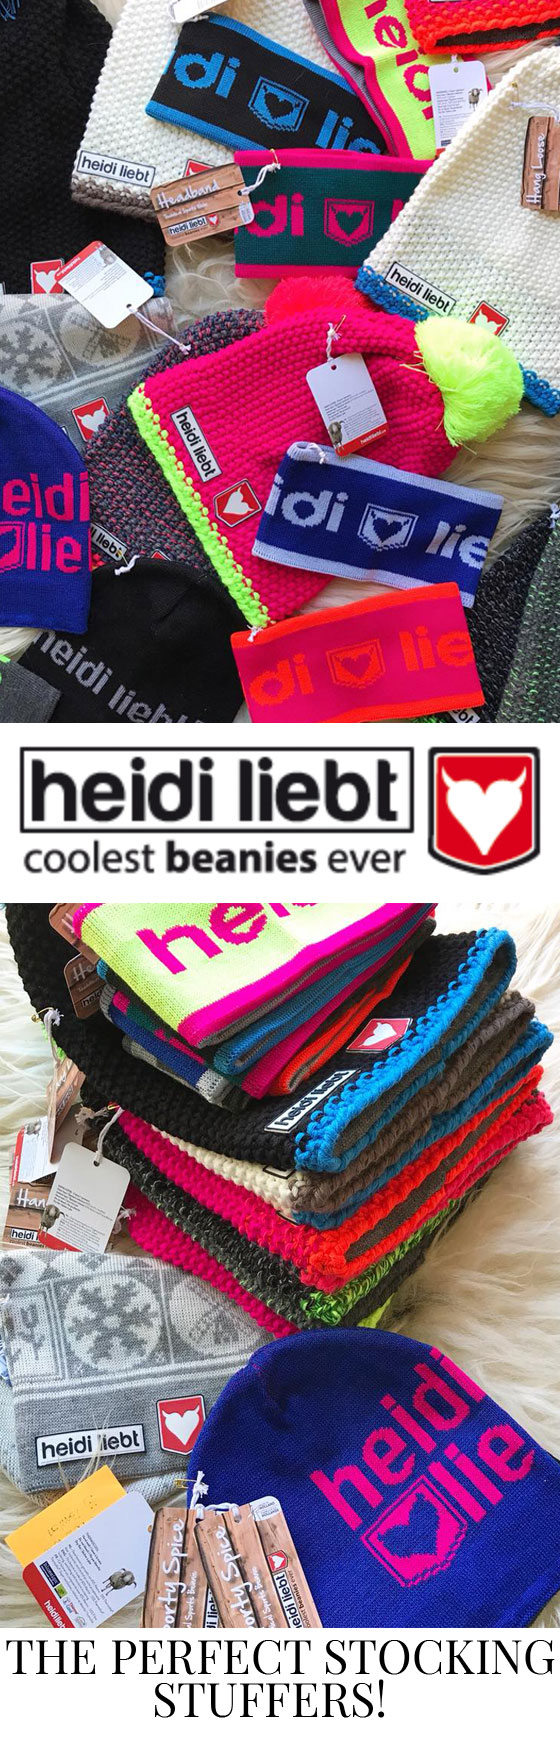 Heidi Liebt Beanies & a Holiday Special for YOU (check my website for the discount code) These are the perfect stocking stuffers and great holiday gifts for snow junkies! MarlaMeridith.com ( @marlameridith )